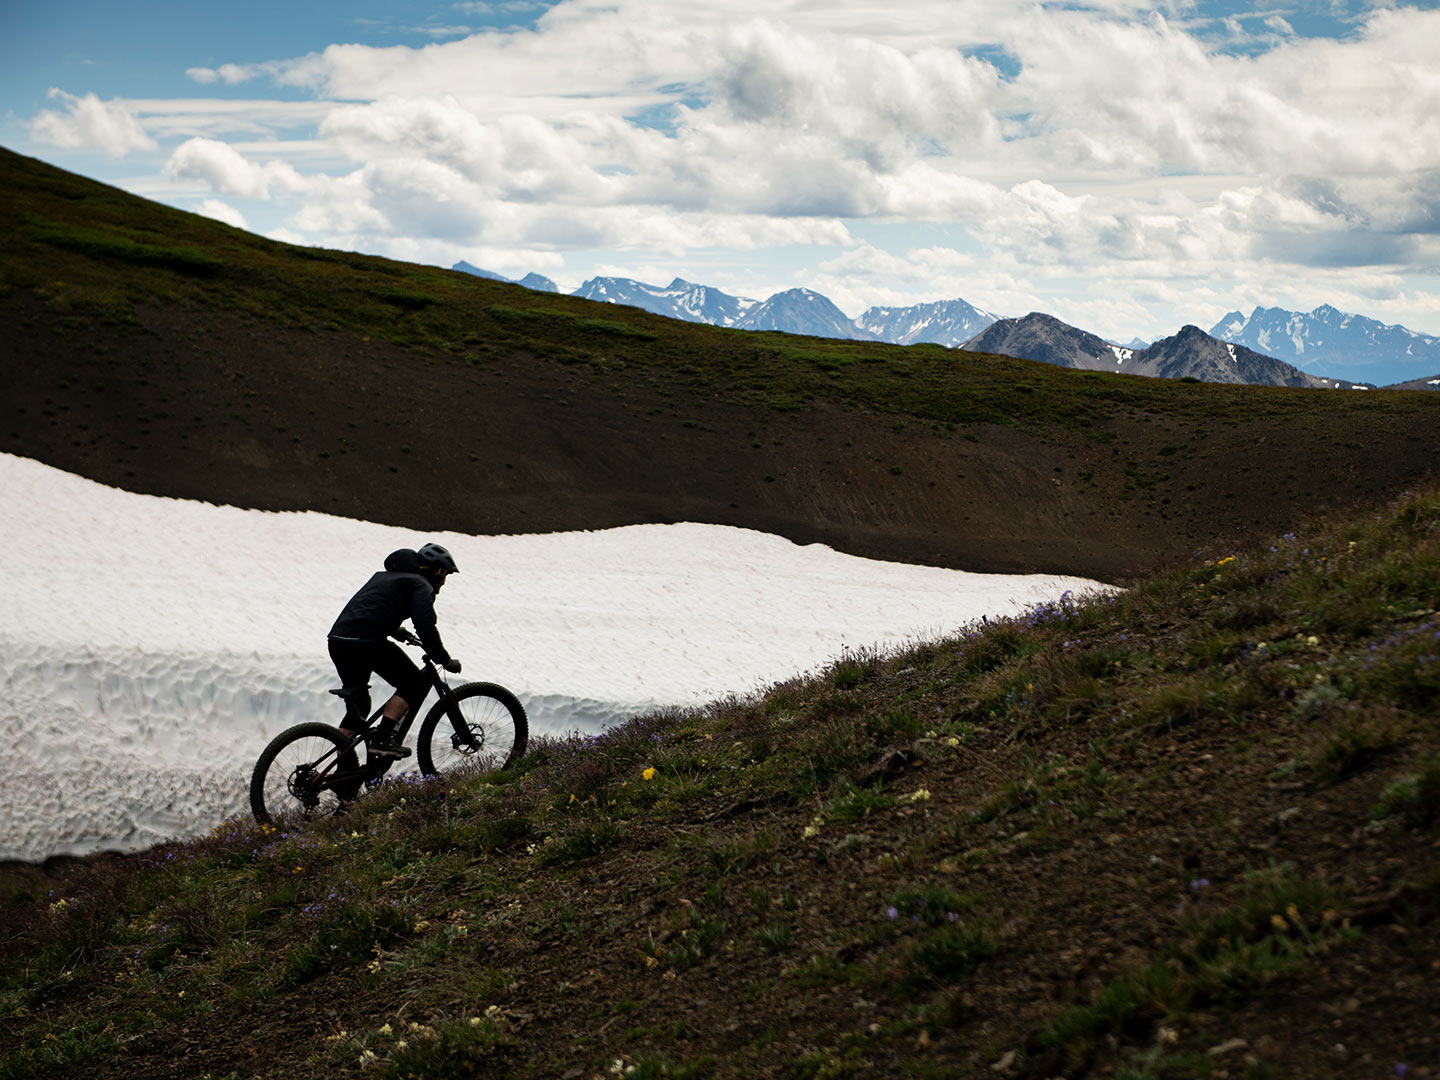 Rider climbs up trail next to snow bank